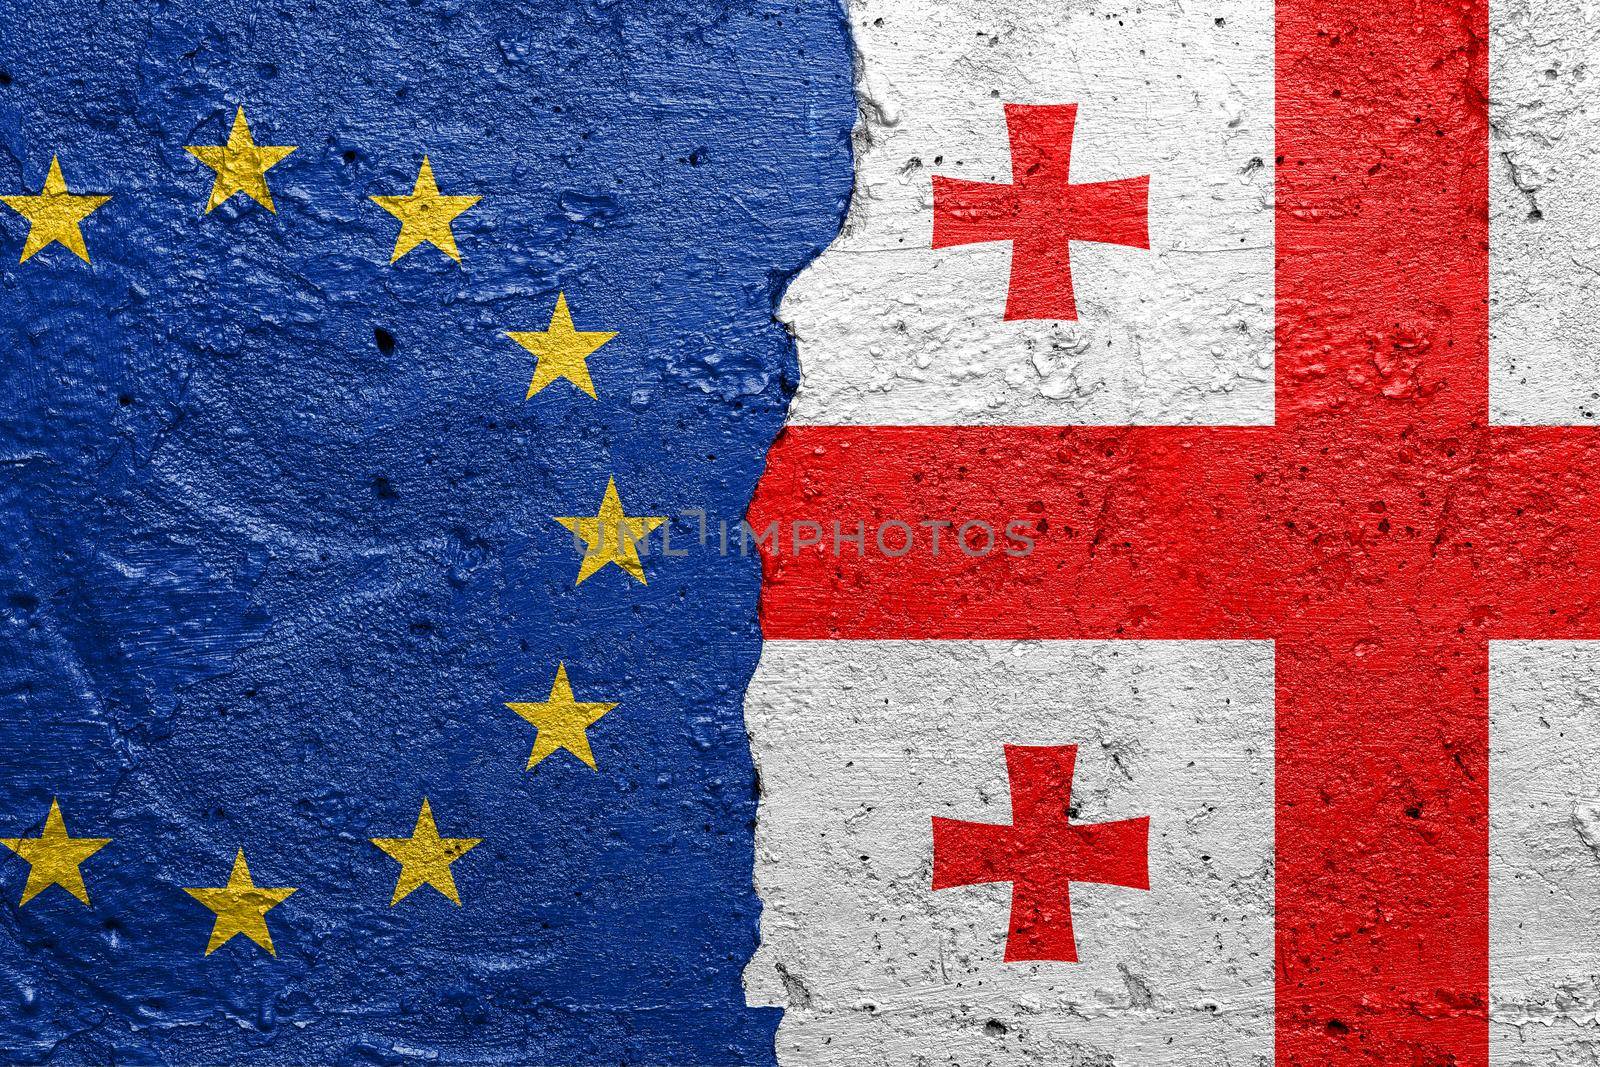 European Union and Georgia - Cracked concrete wall painted with a EU flag on the left and a Georgian flag on the right stock photo by adamr